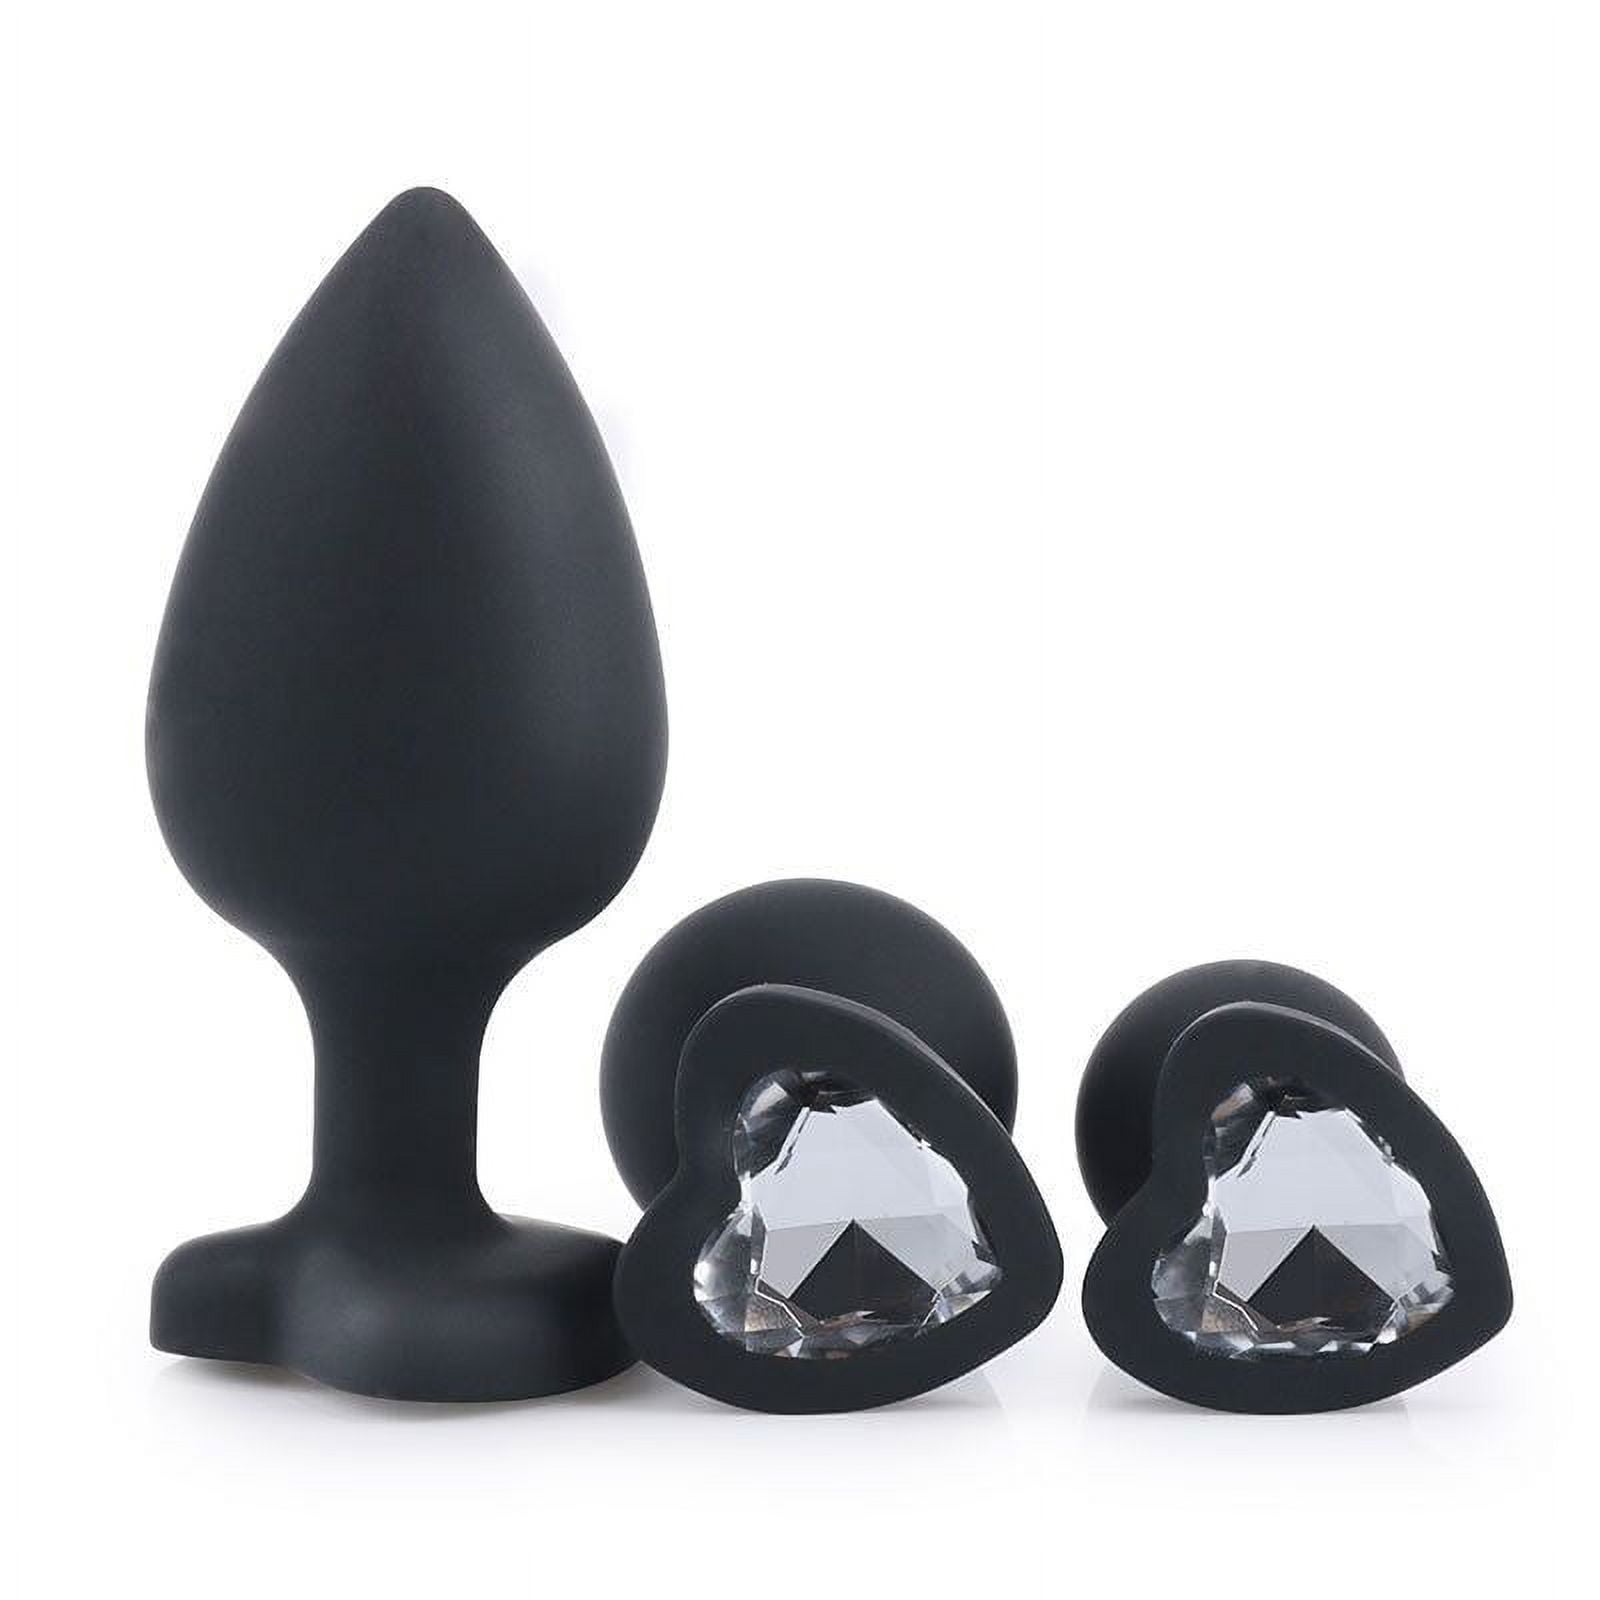 Anal Sex Trainer 3pcs Silicone Jeweled Butt Plugs Anal Sex Toys Kit For Starter Beginner Men 1575